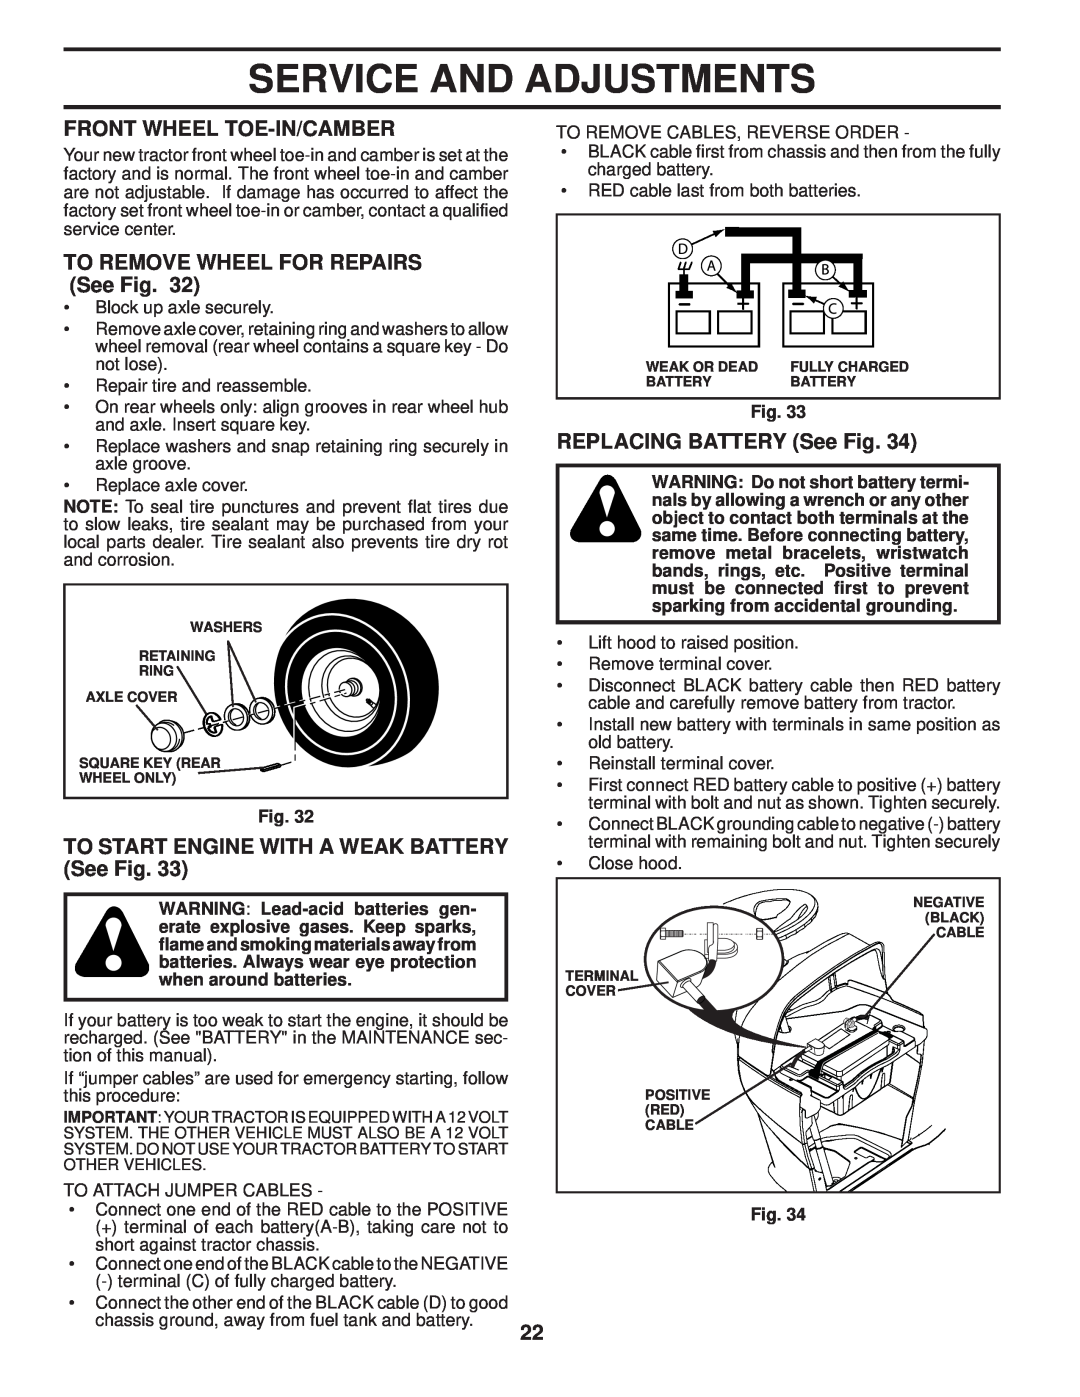 Husqvarna 960430120 owner manual Front Wheel Toe-In/Camber, TO REMOVE WHEEL FOR REPAIRS See Fig, REPLACING BATTERY See Fig 